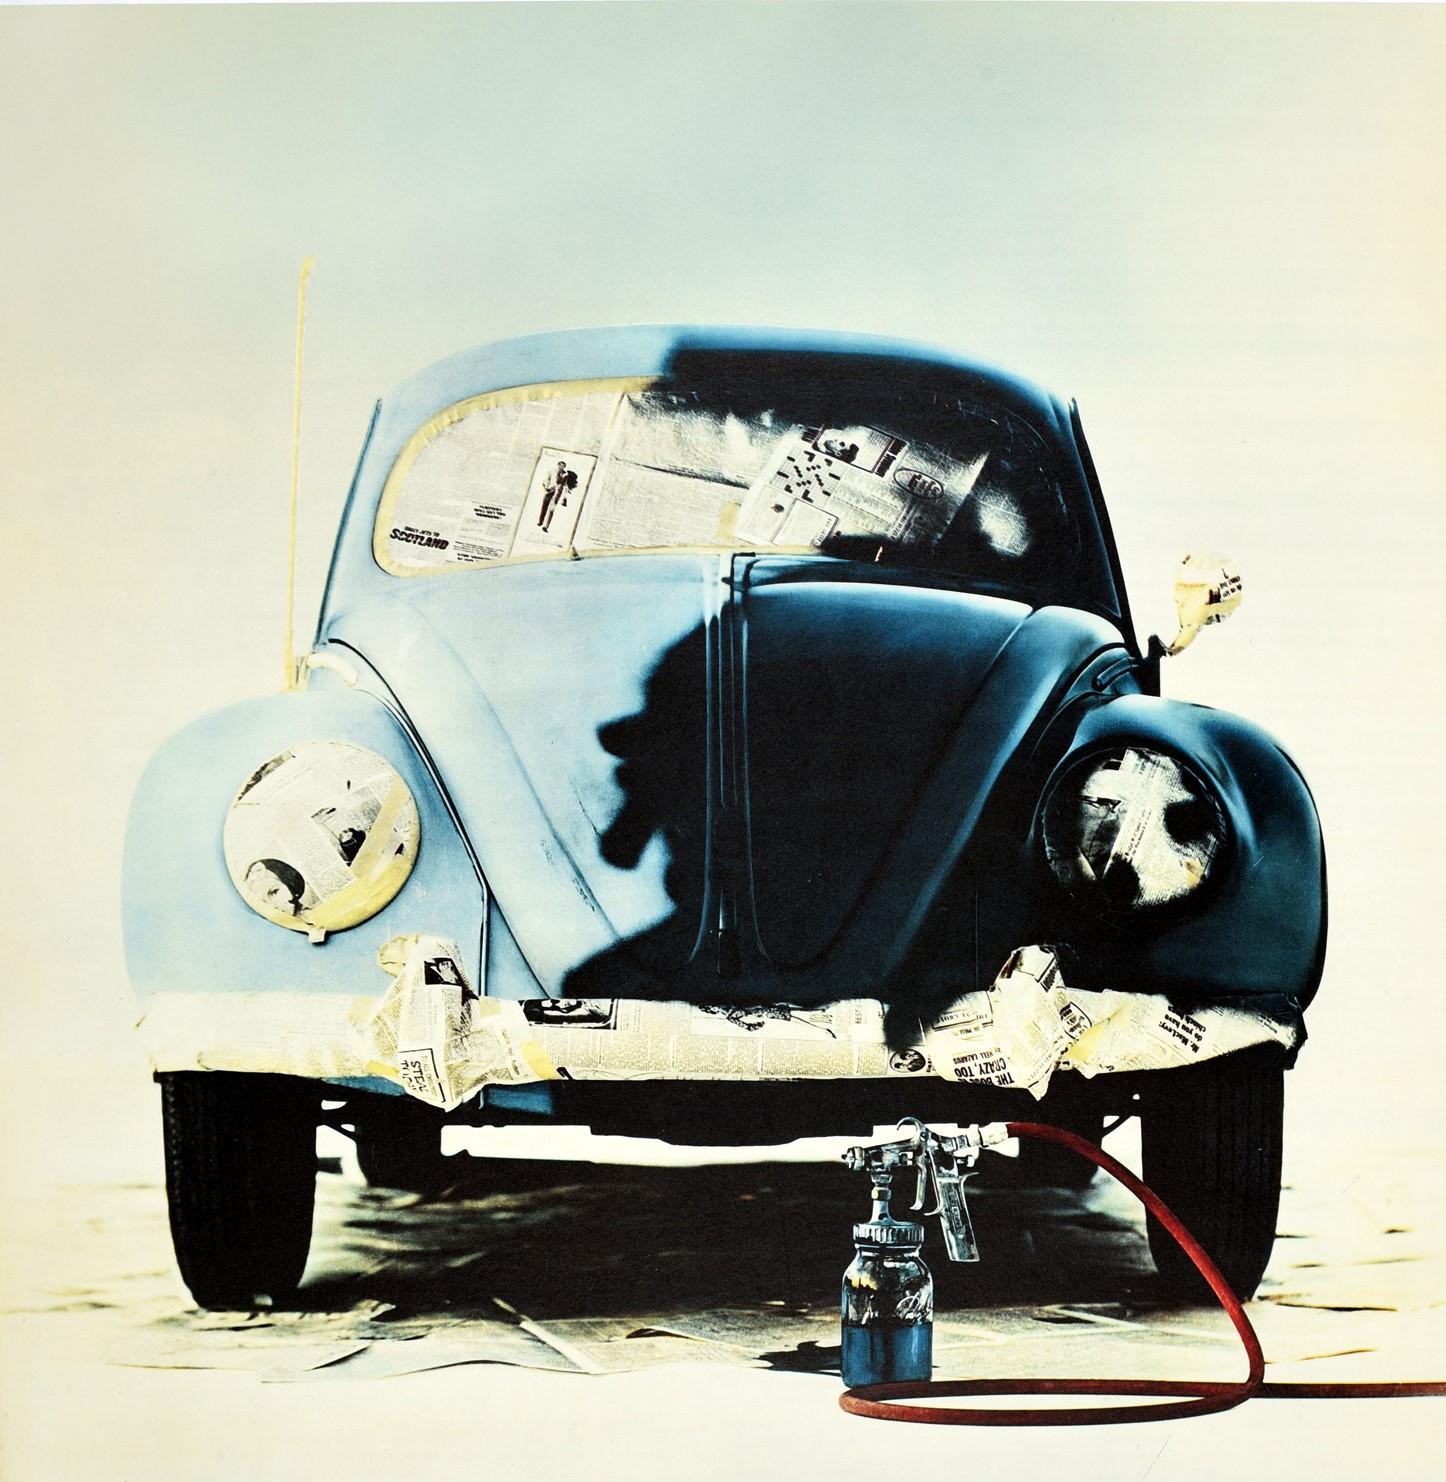 Original vintage car dealer showroom advertising poster for Volkswagen Beetle - How to make a '54 look like a '64 - featuring a great design depicting a half-painted VW Beetle with the windows, lights, bumper and mirrors covered in newspaper to